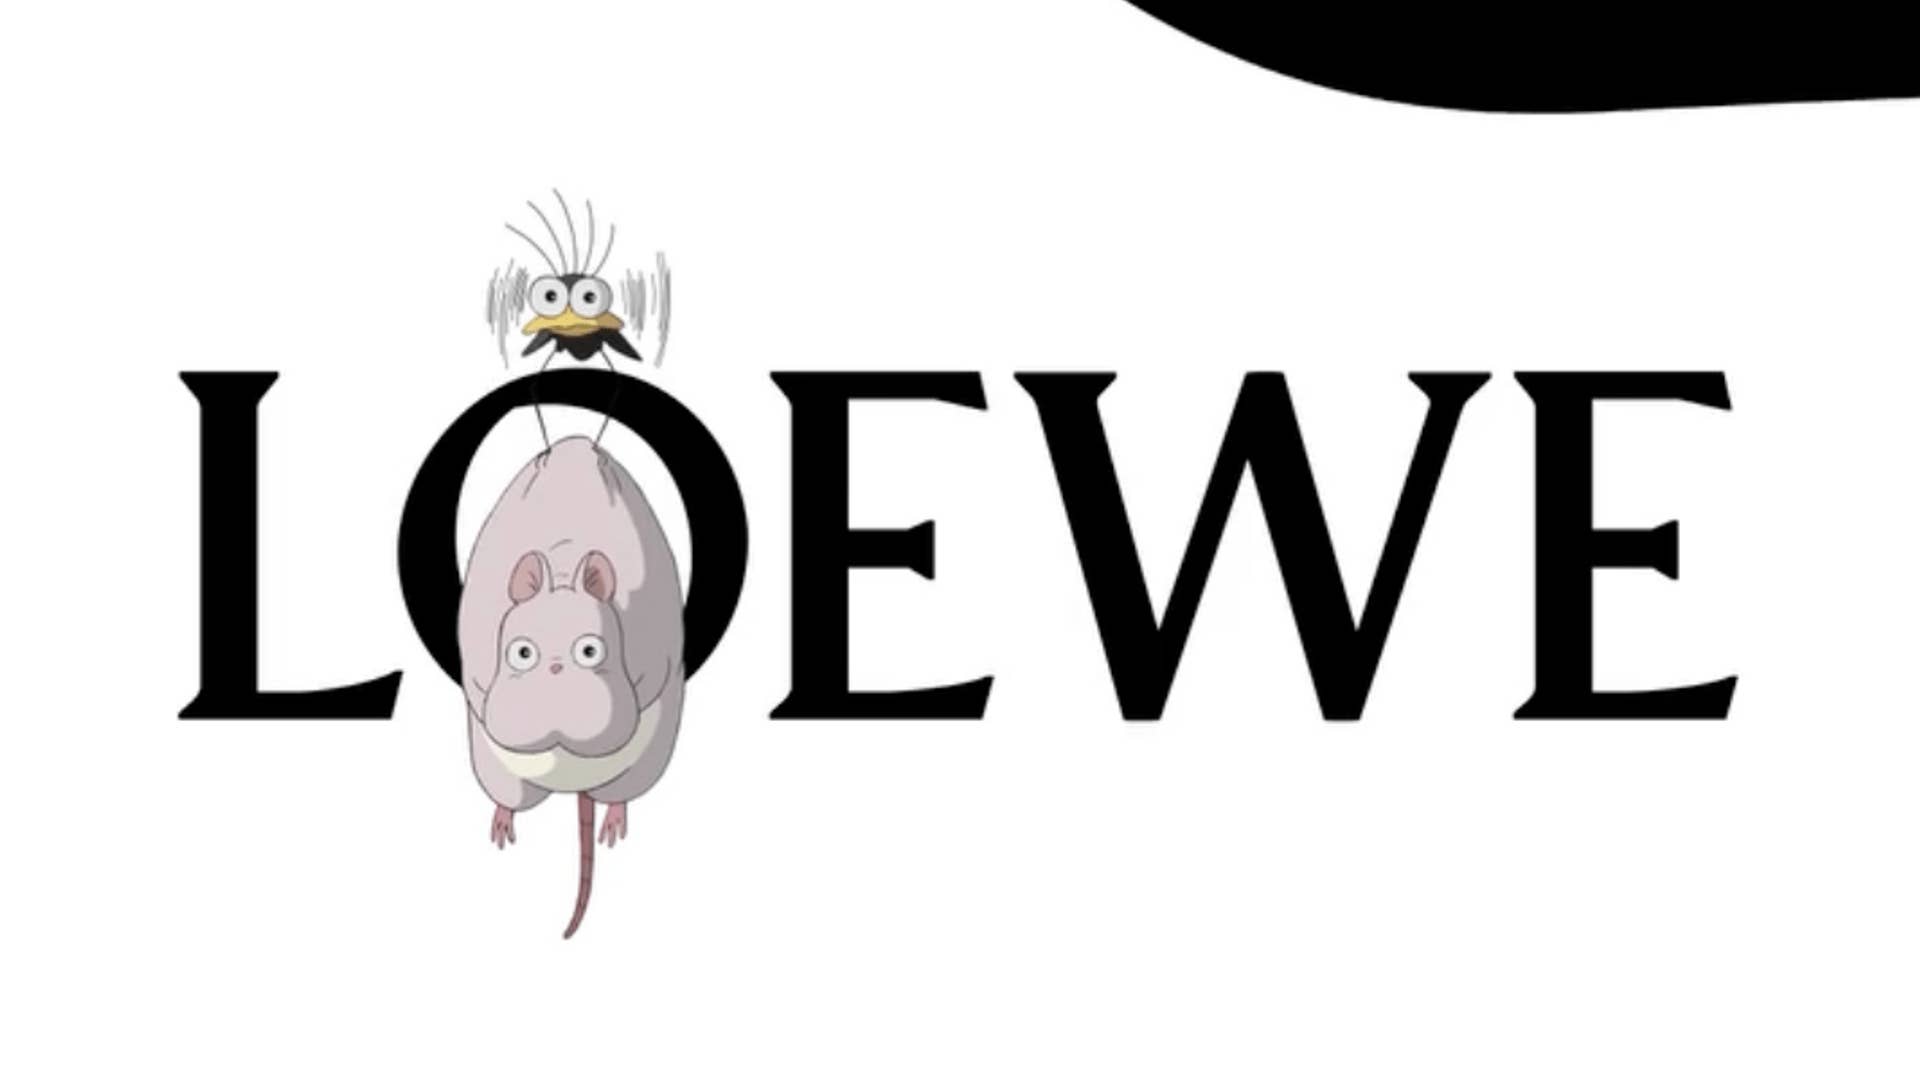 Logo from the LOEWE 'Spirited Away' collection